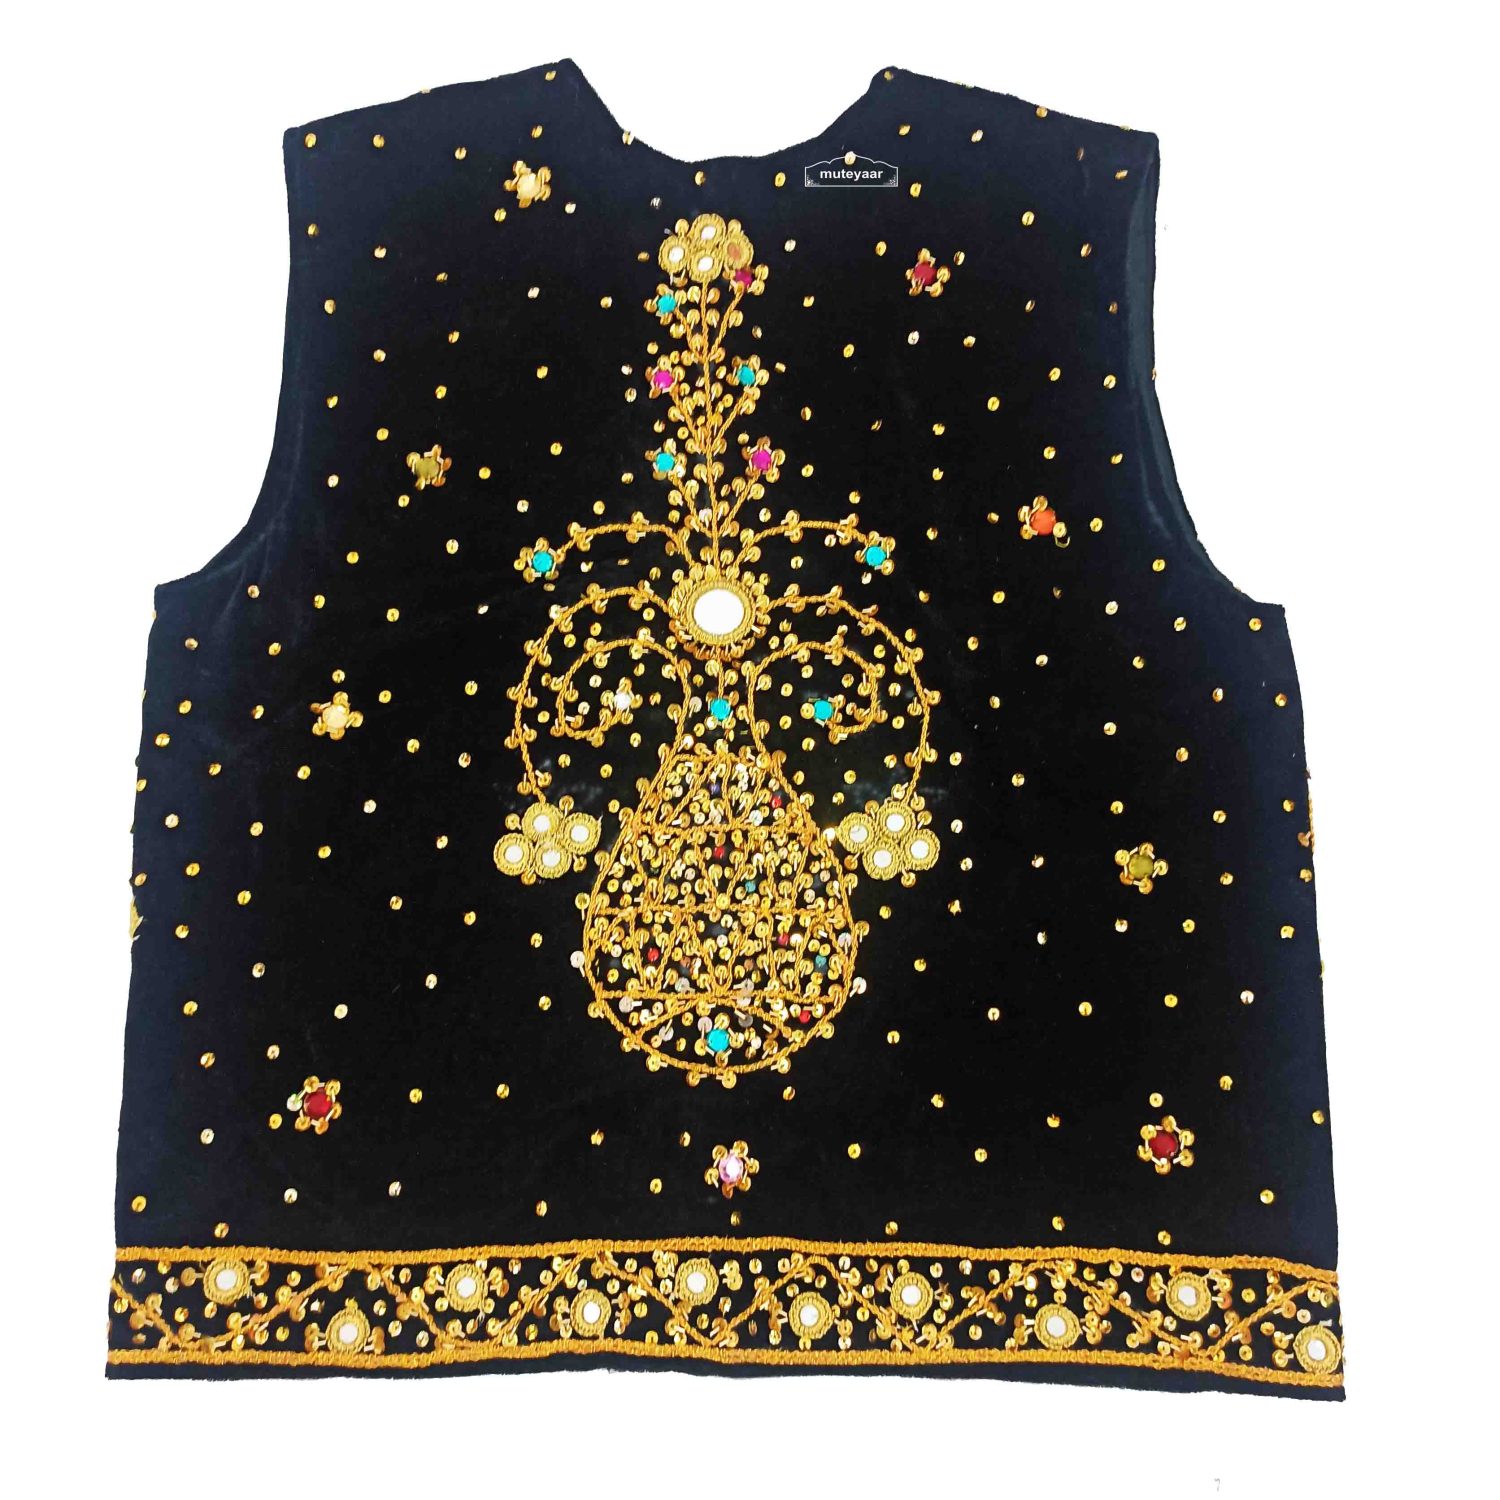 Embroidered Vest for bhangra dance costume/outfit